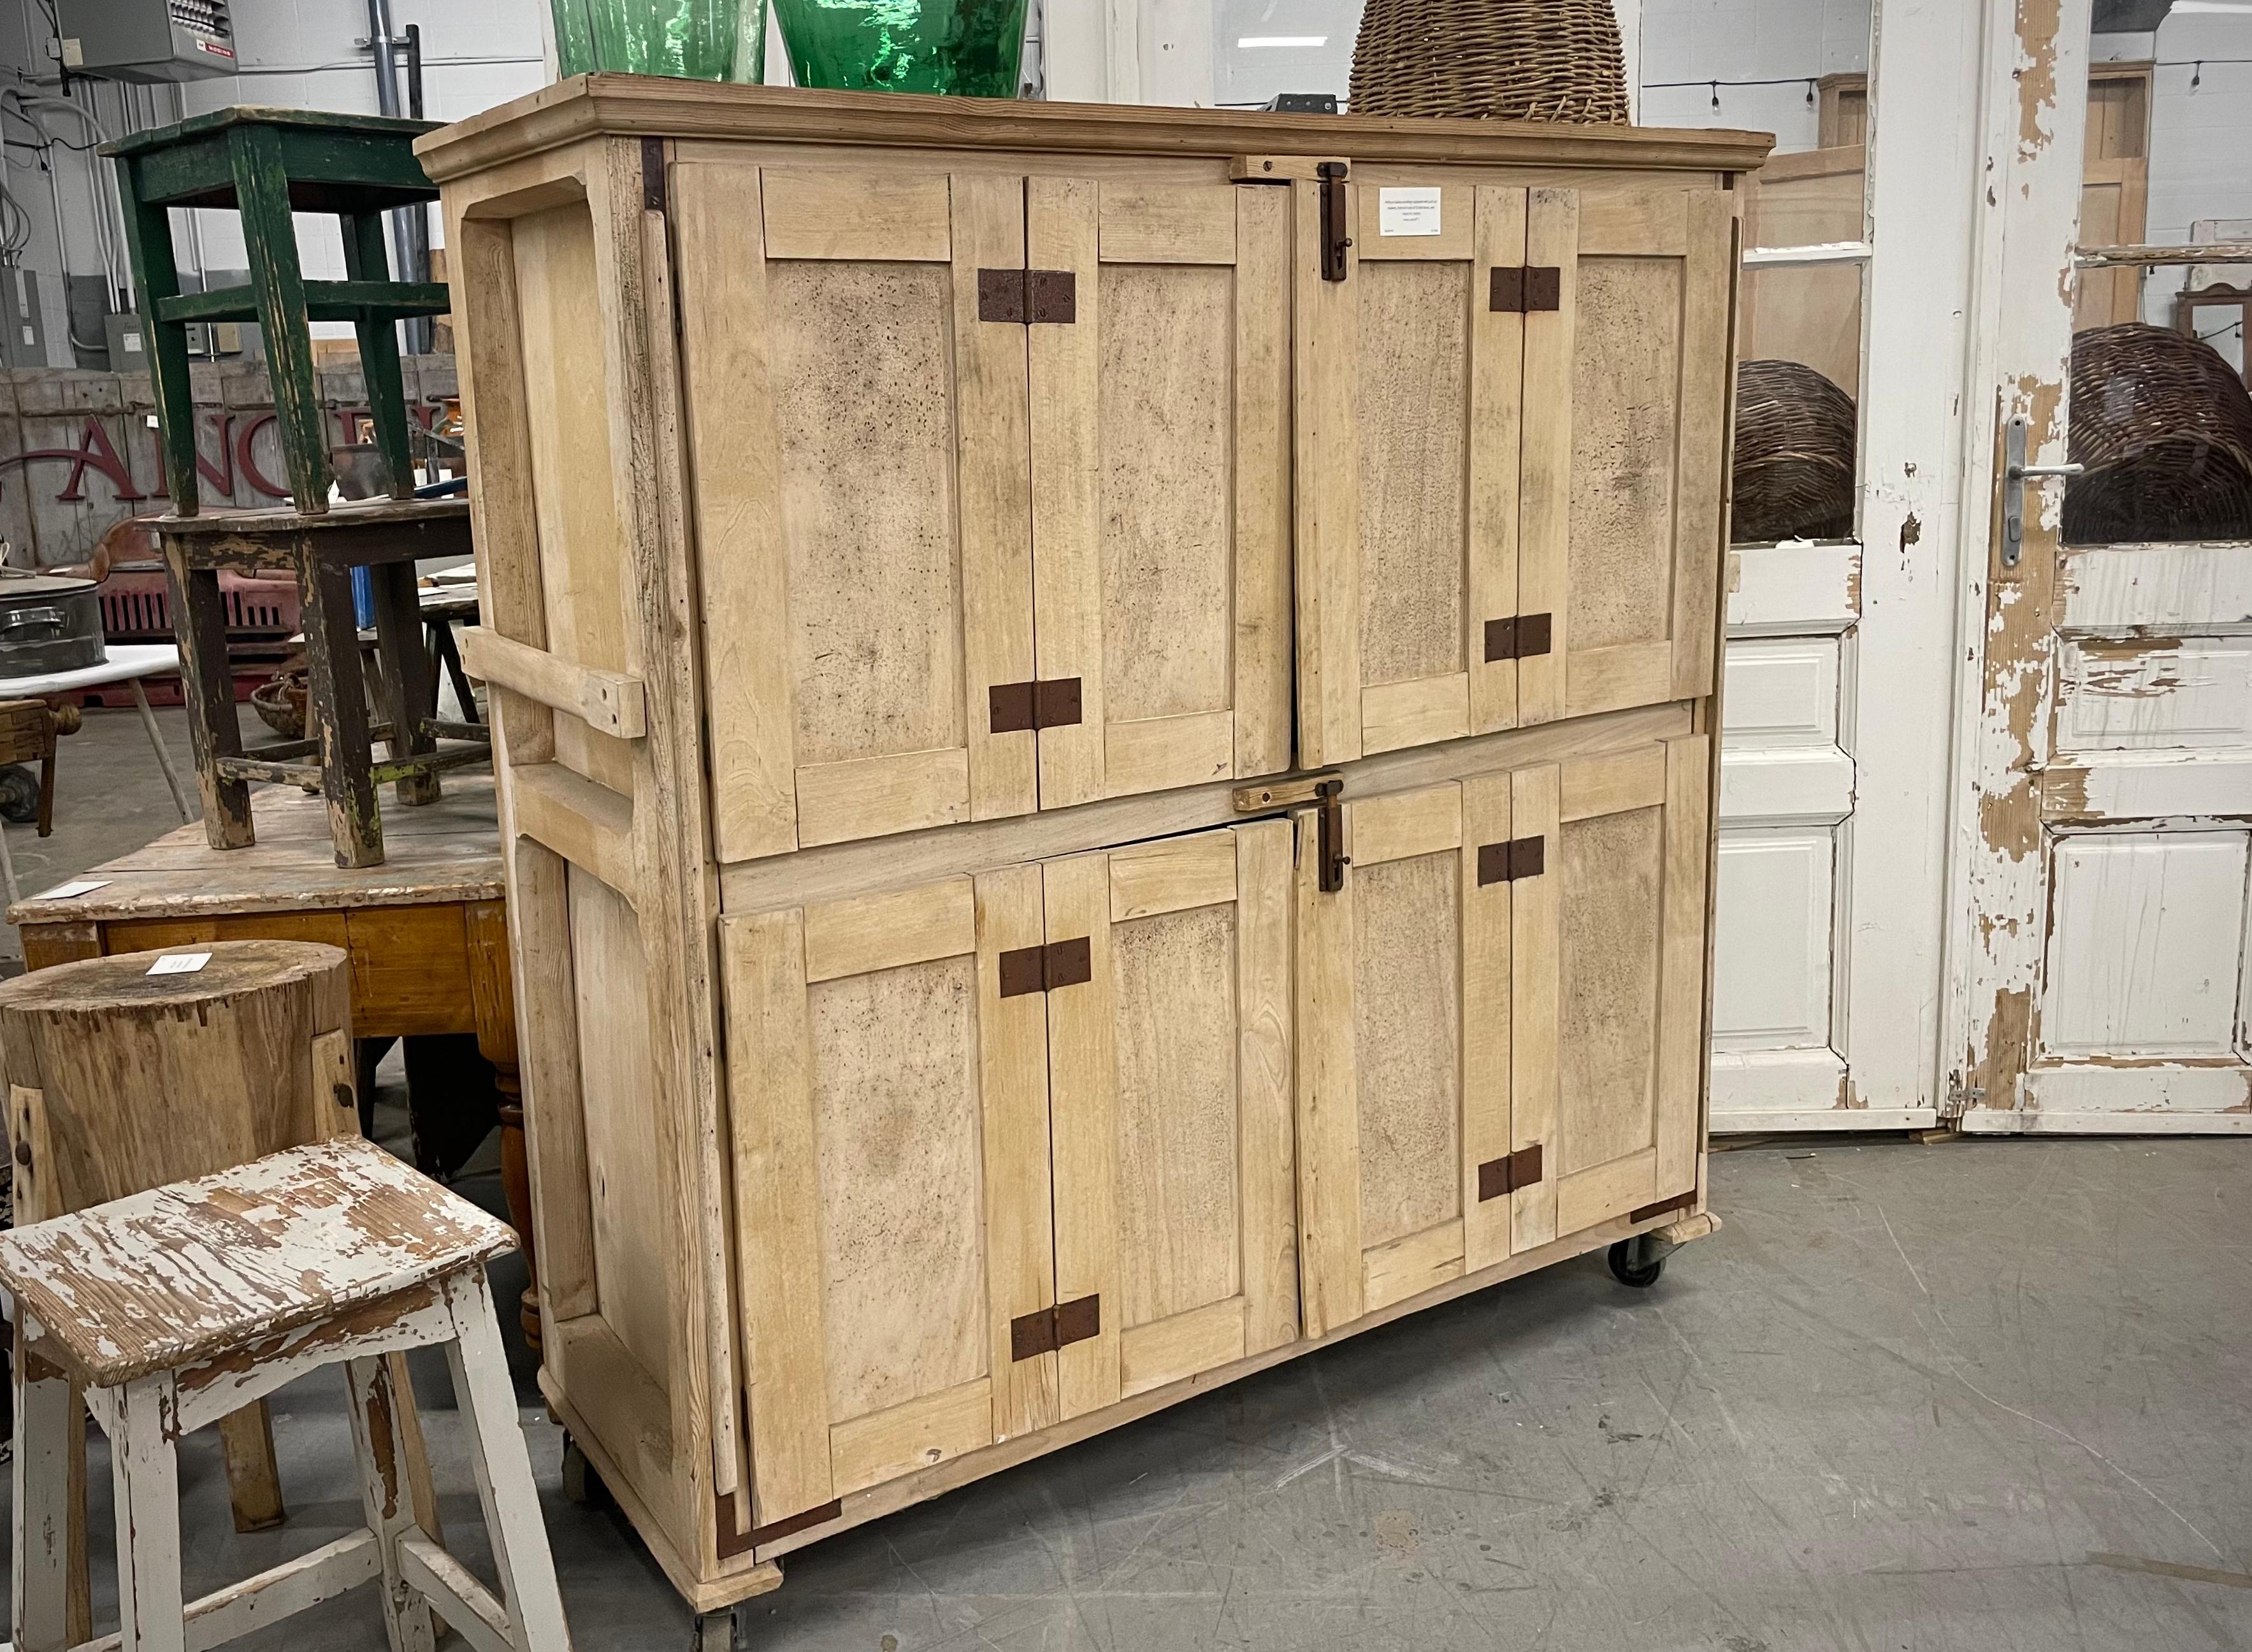 Vintage baker’s cupboard with pull out drawers, behind 4 sets of bi-fold doors, and raised on casters. 

It was once used for the proofing dough in a French bakery! Today it can be utilized as a useful kitchen storage cupboard. 